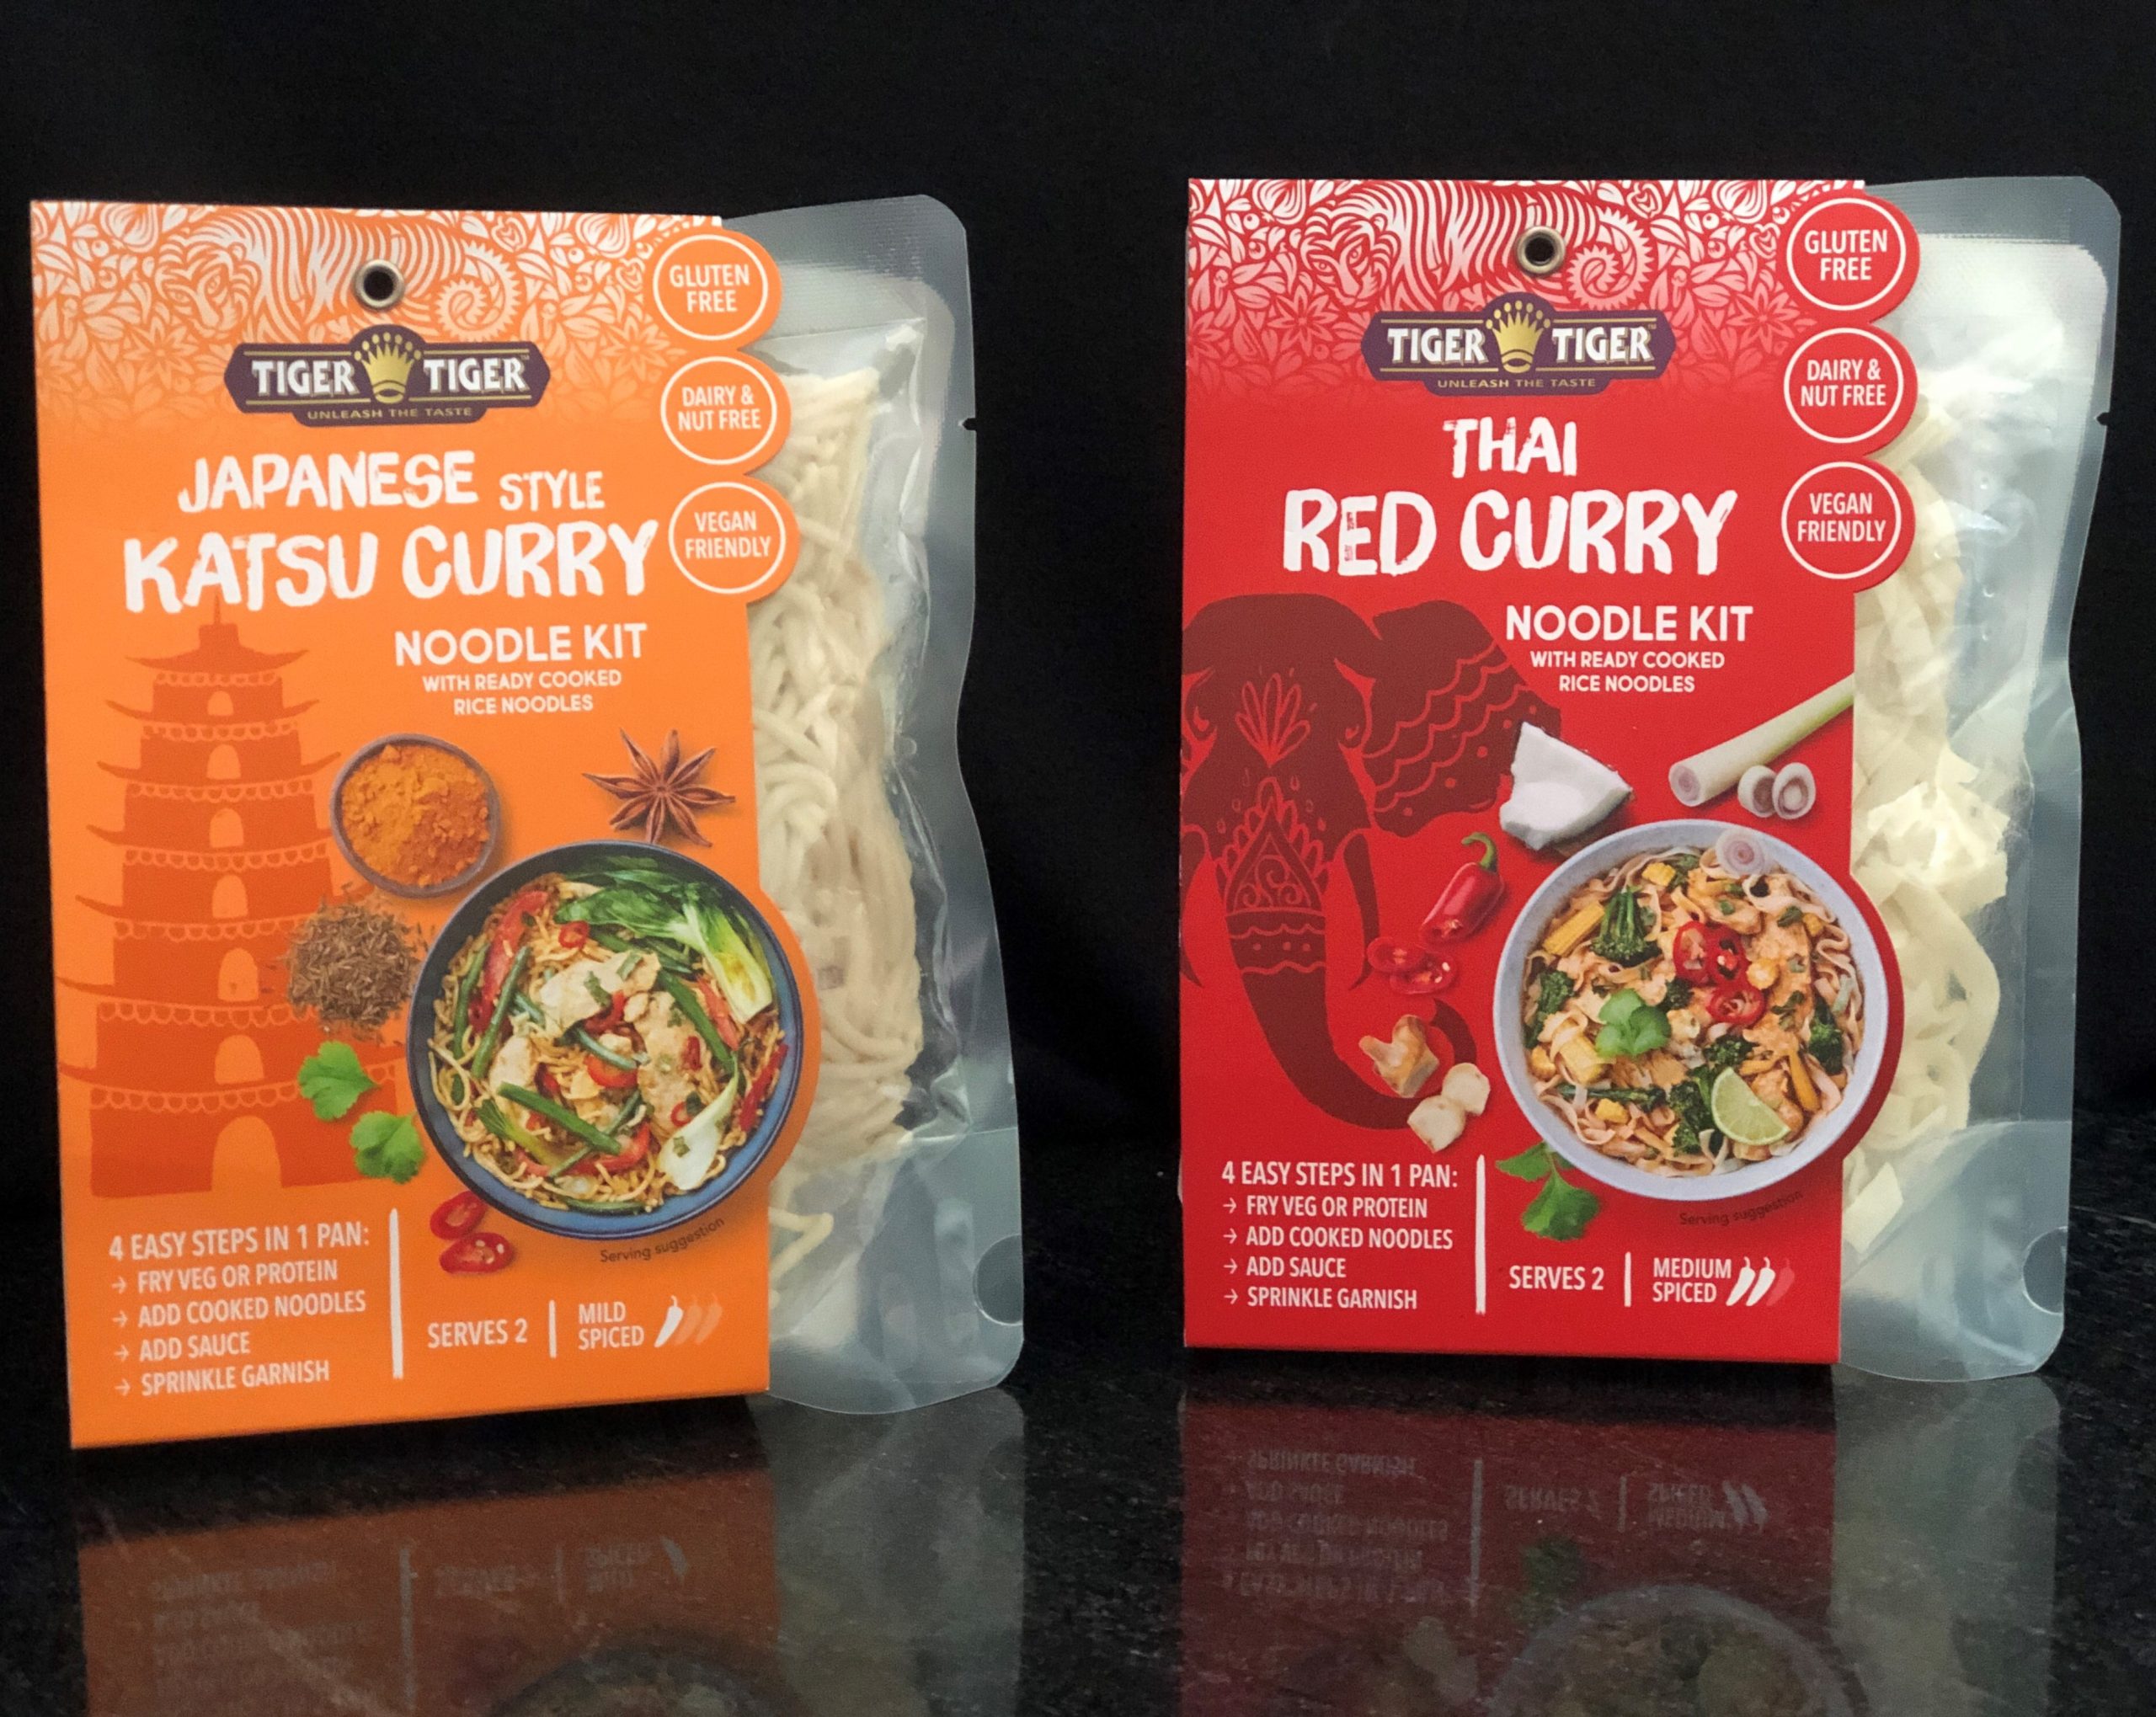 Tiger Tiger launches free-from noodle kits in UK